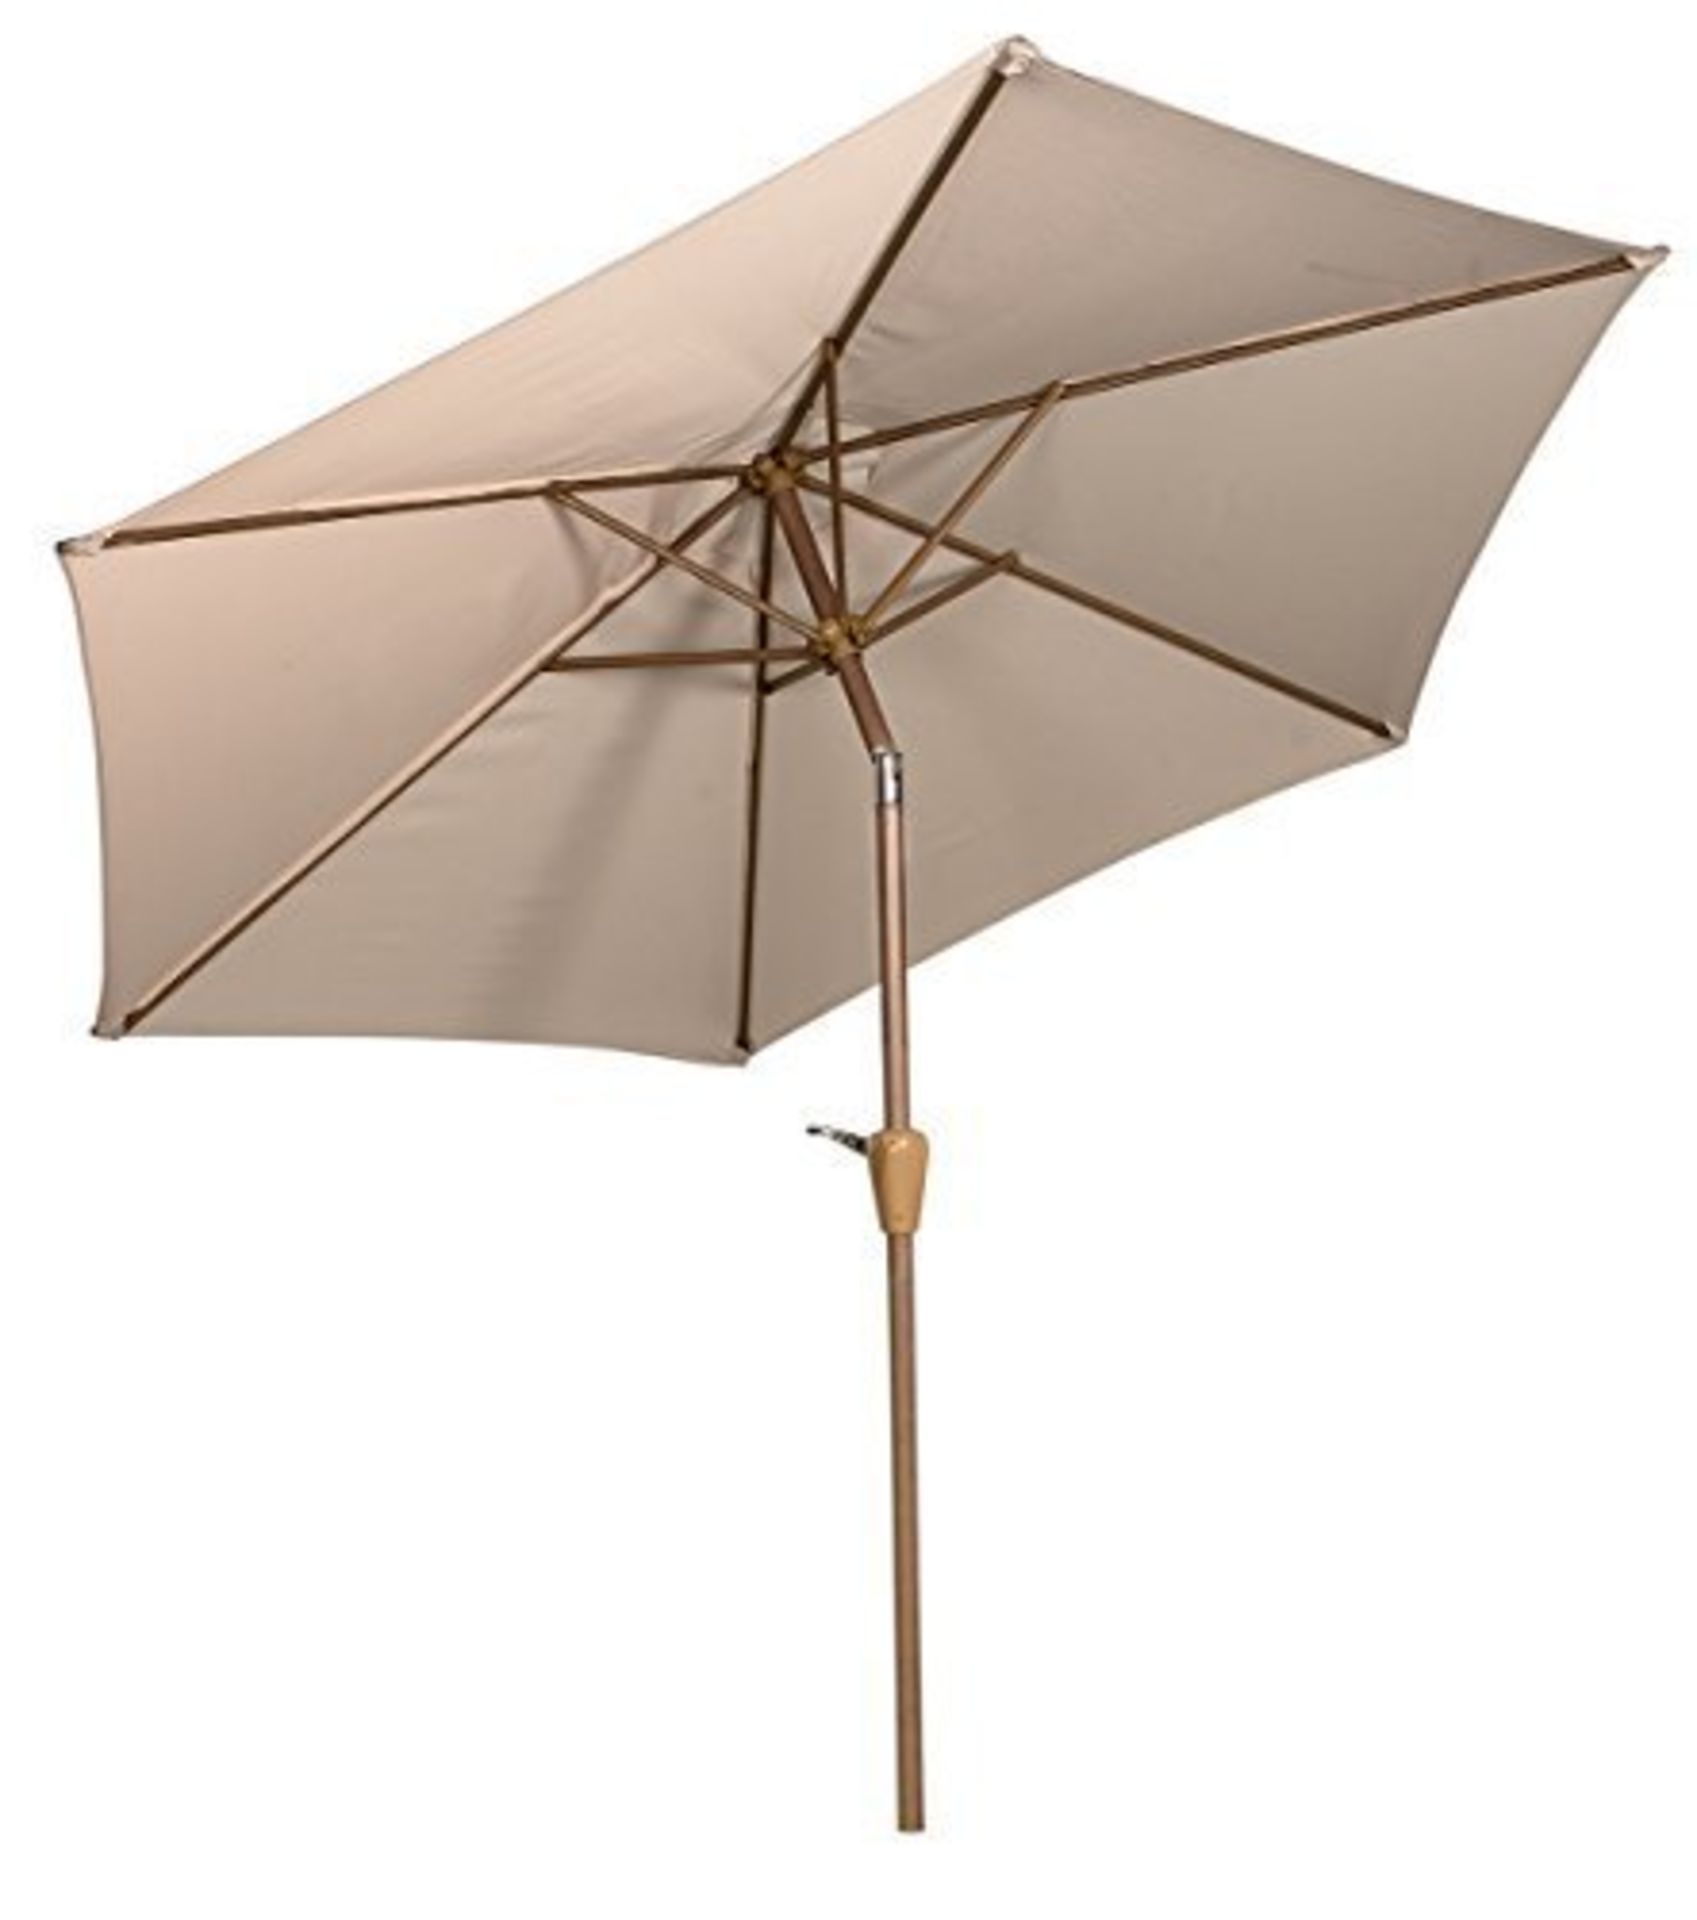 V Brand New Oyster 3.5m Wood Effect Crank Parasol X 2 YOUR BID PRICE TO BE MULTIPLIED BY TWO